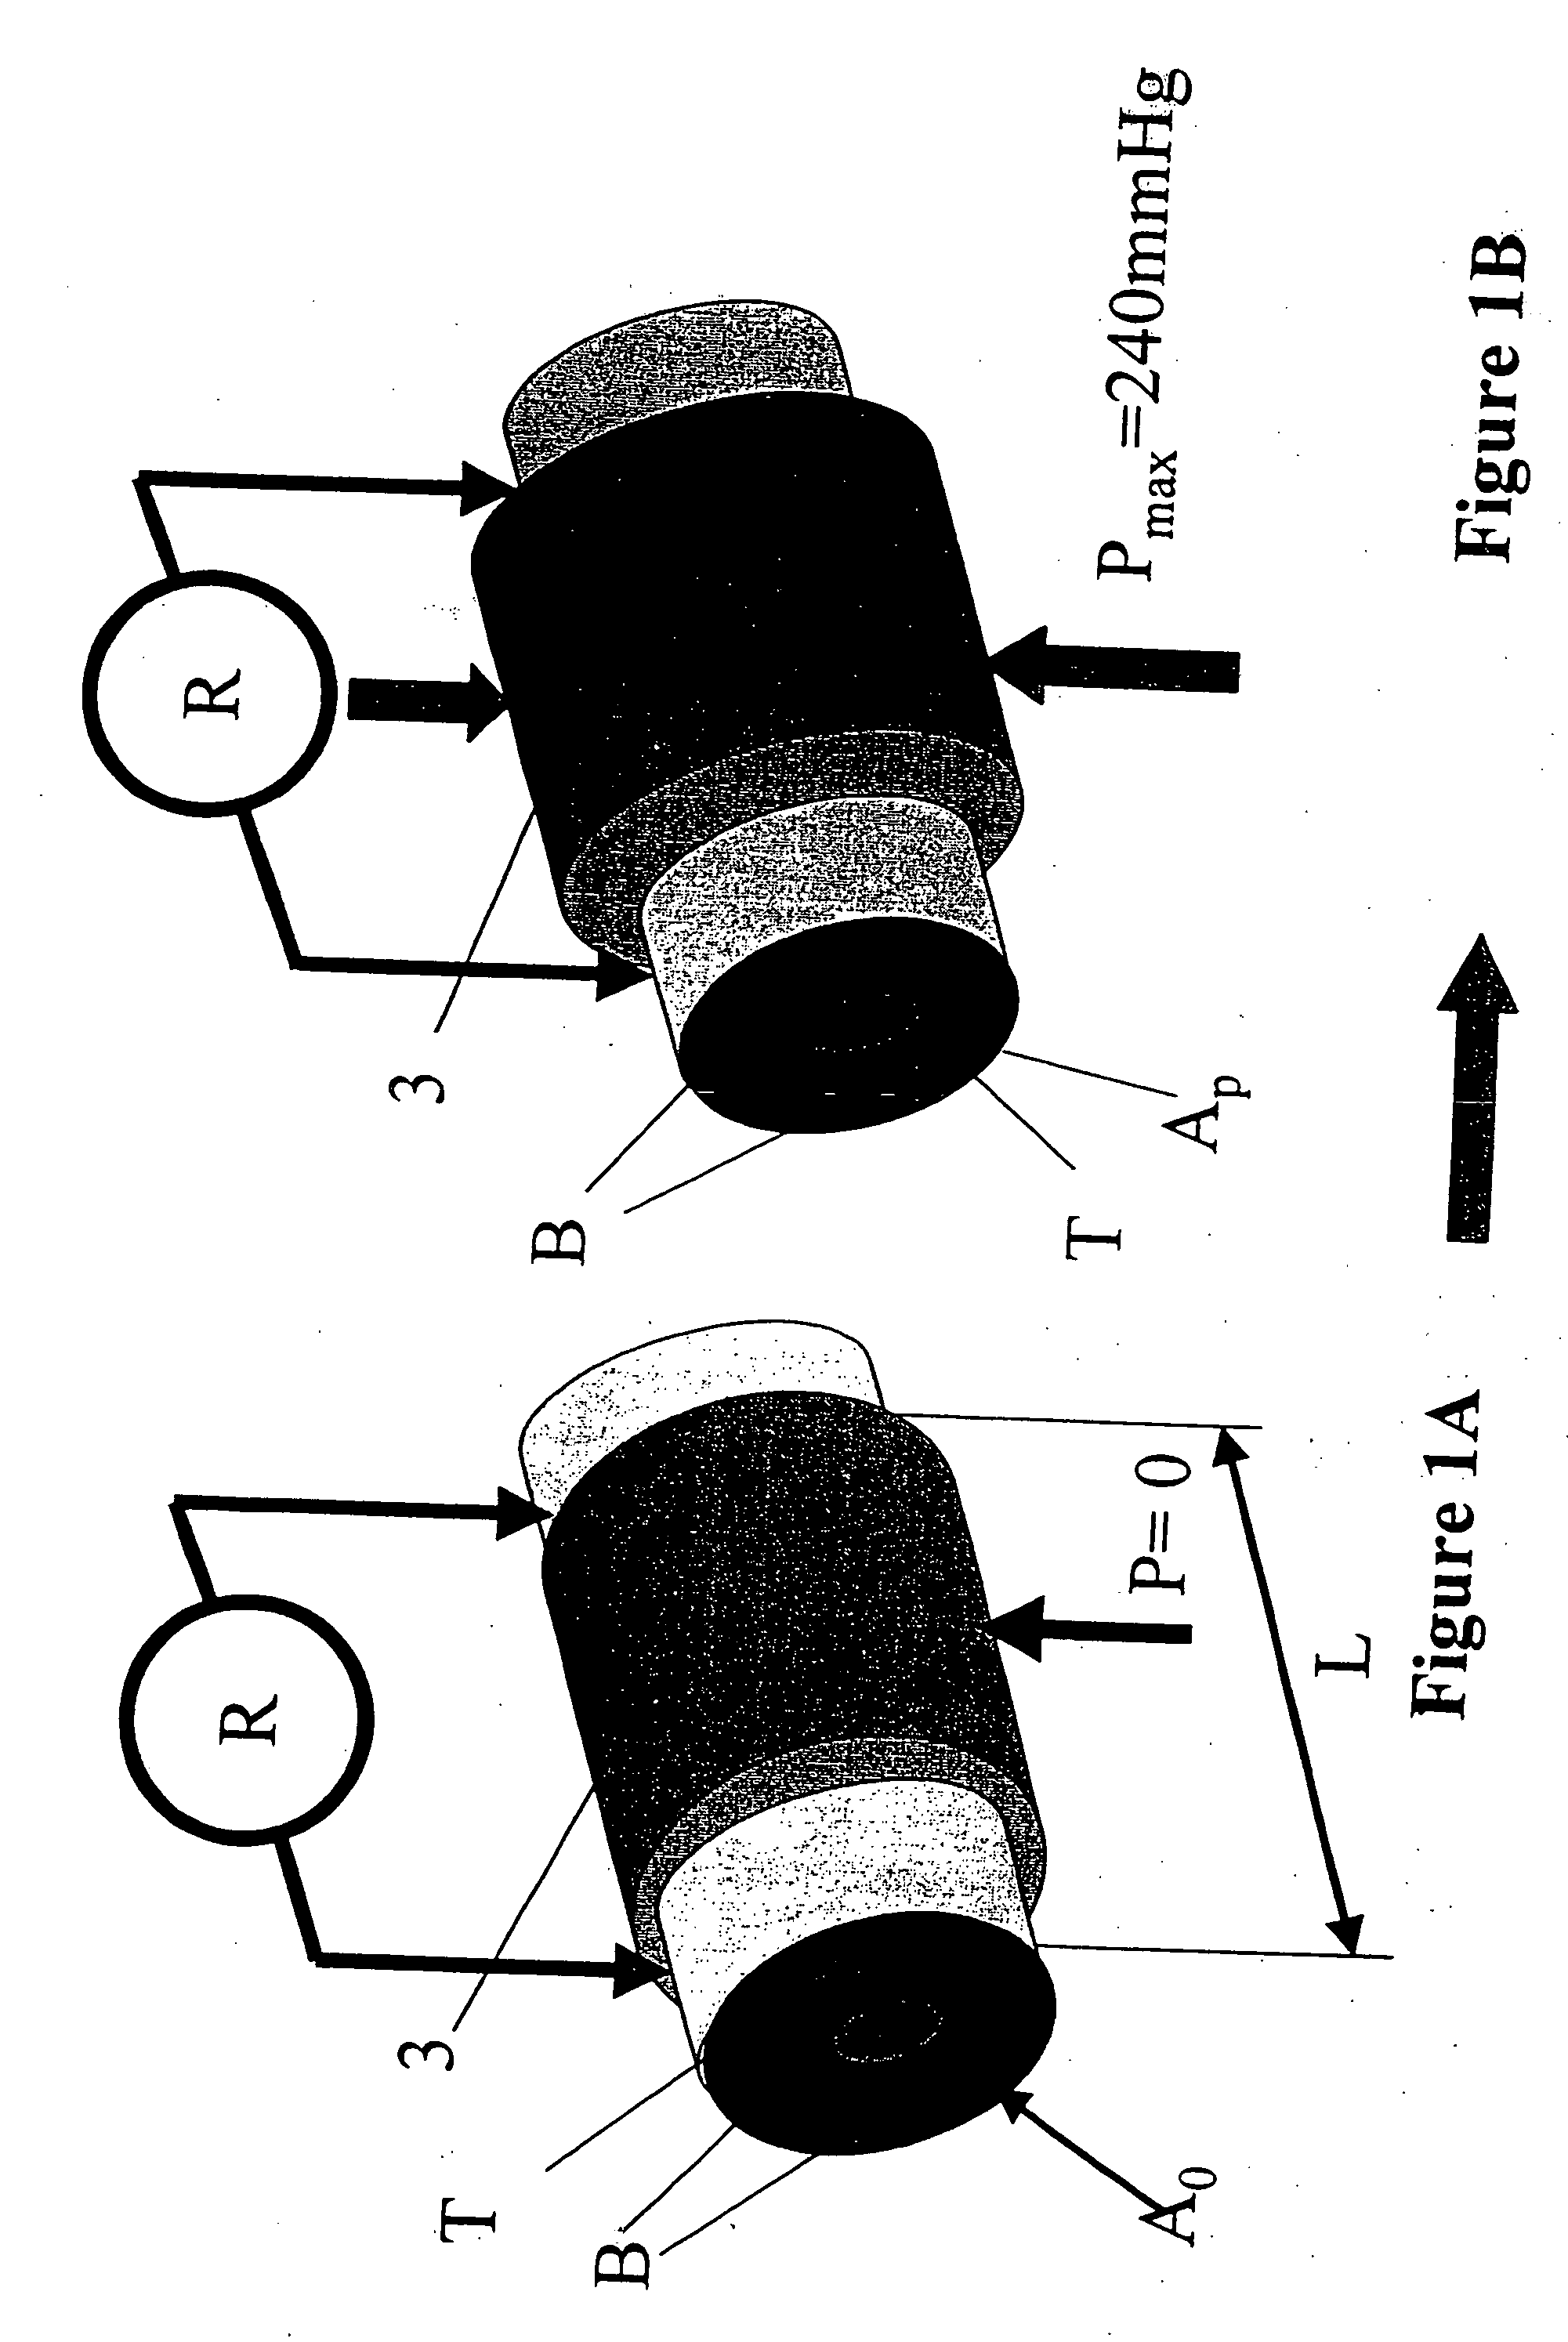 Device and method for the determination of dry weight by continuous measurement of resistance and calculation of circumference in a body segment using segmental bioimpedance analysis